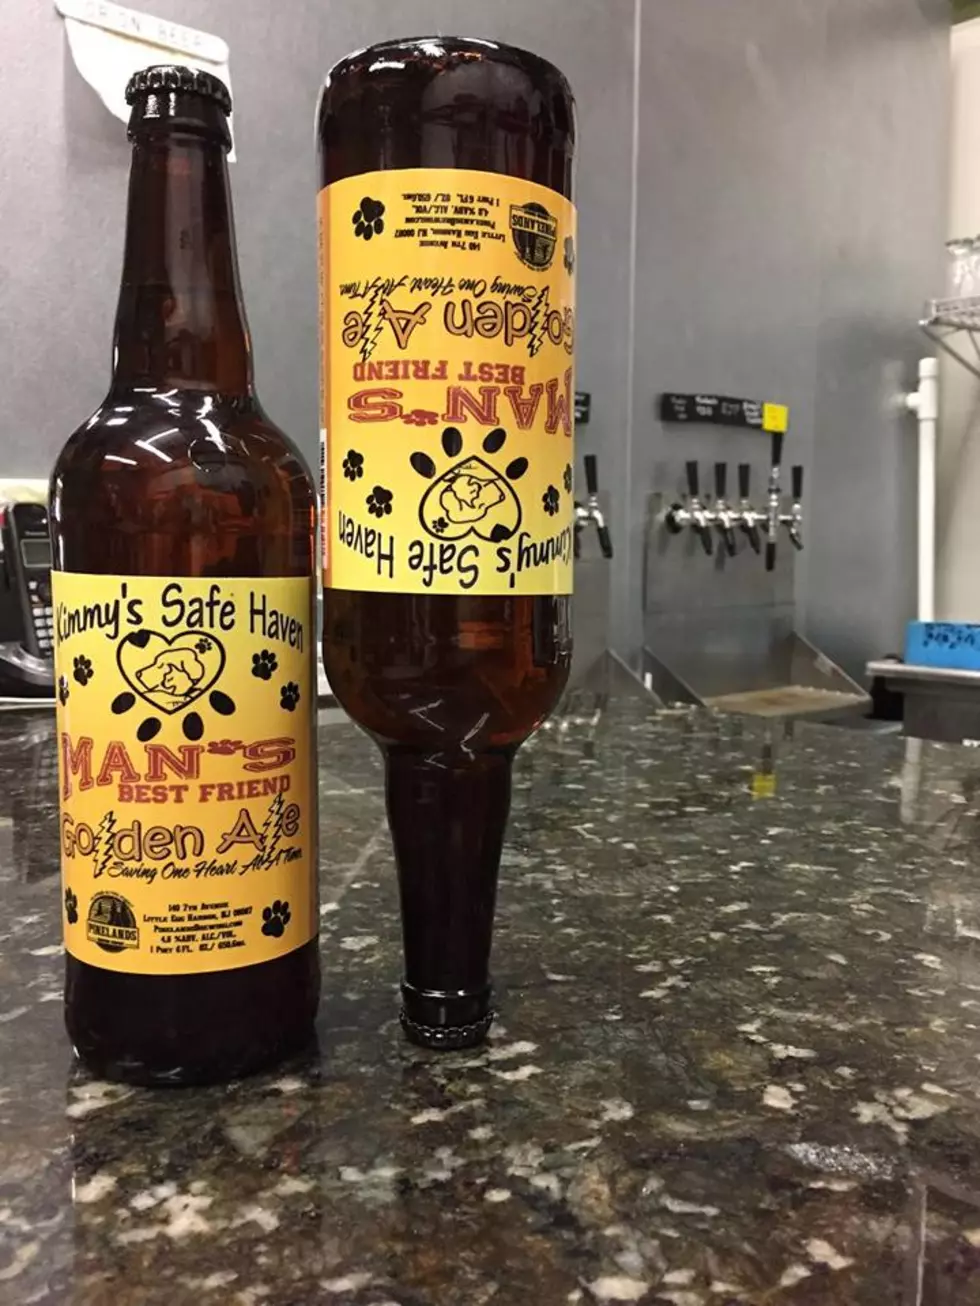 Release of a New Beer in Tuckerton Will Have You Howling